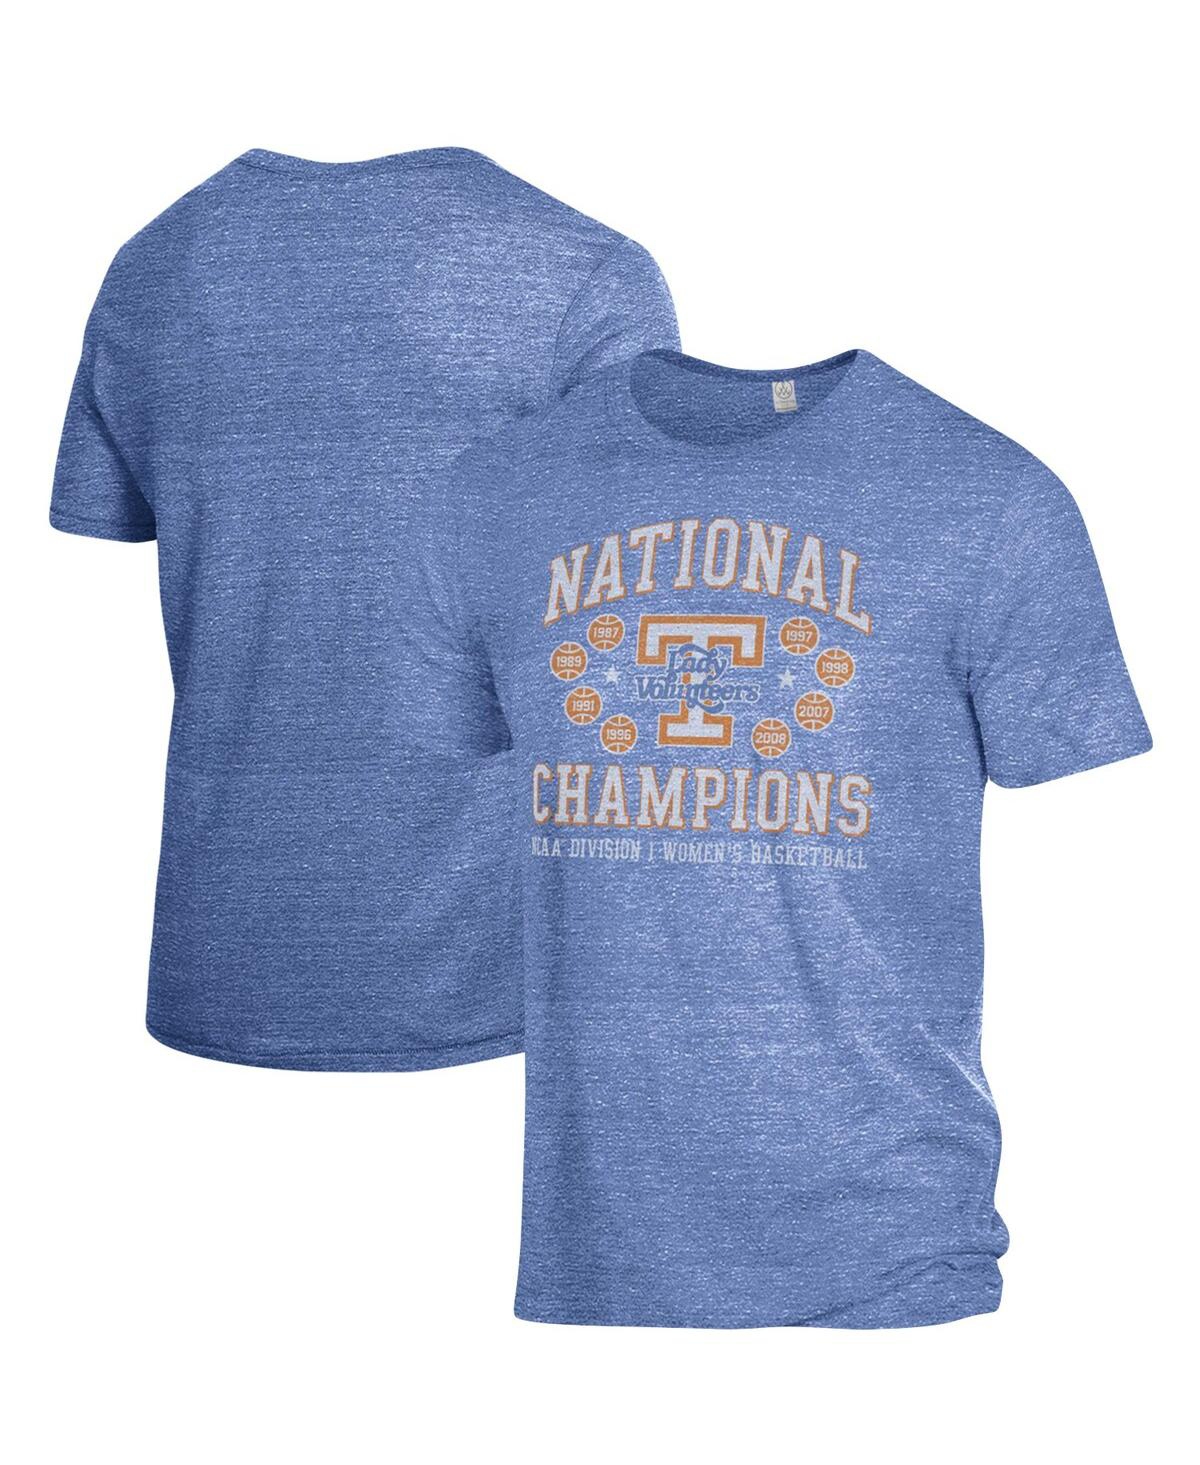 A & A Global Men's Heathered Blue Tennessee Volunteers Ncaa Women's Basketball National Champions Throwback T-shi